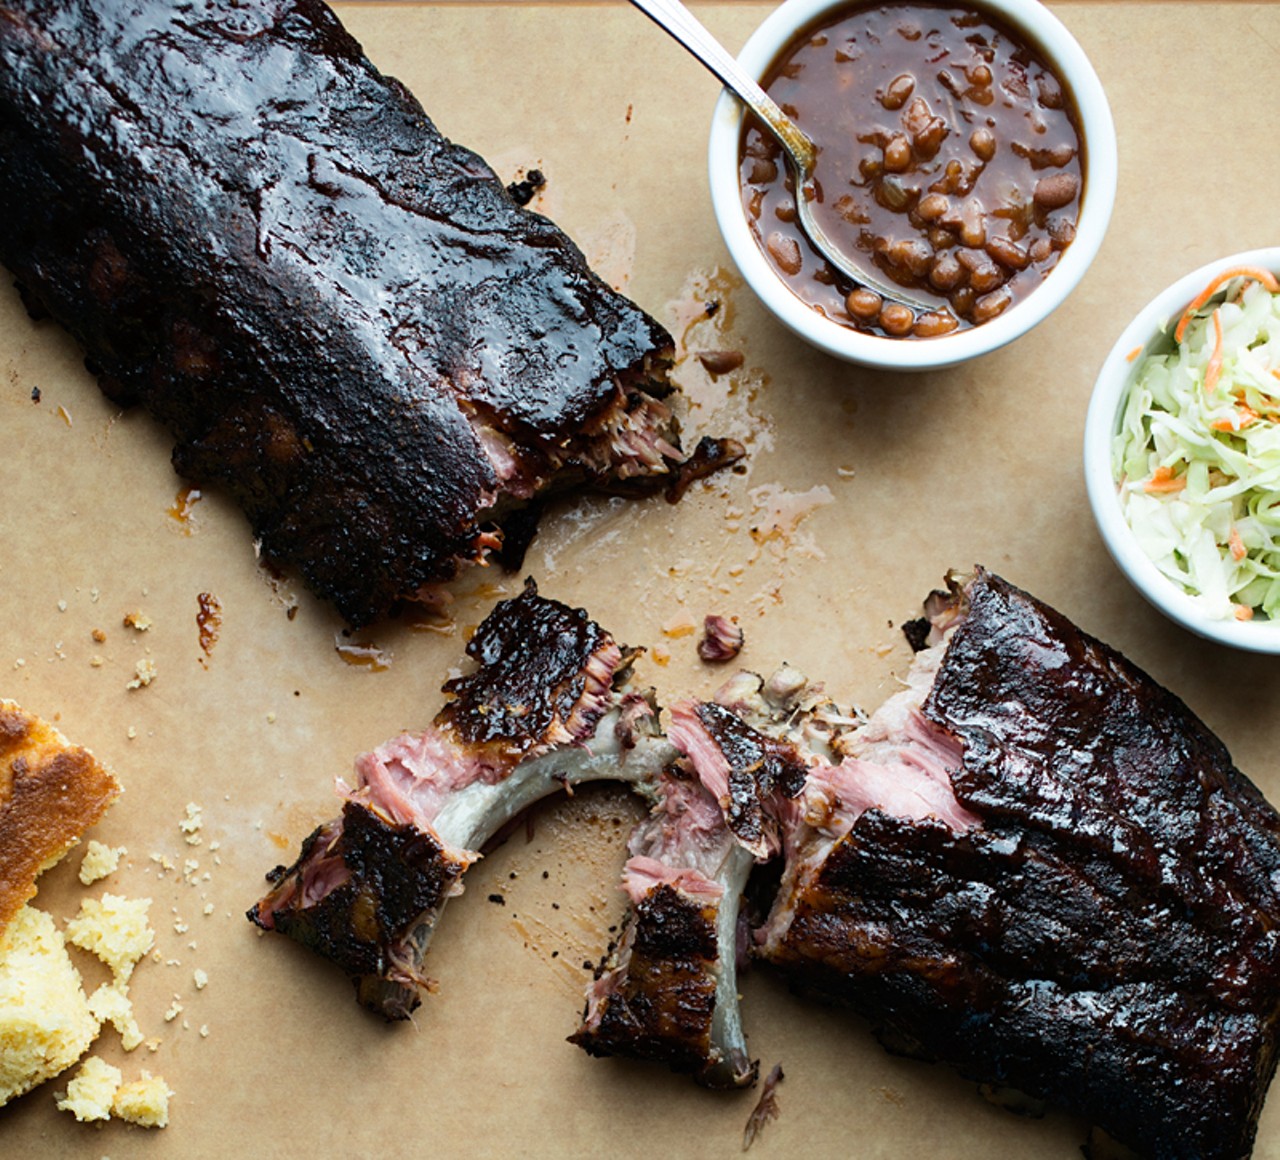 This full slab of ribs is smoked in house and served with beans, cole slaw and cornbread.